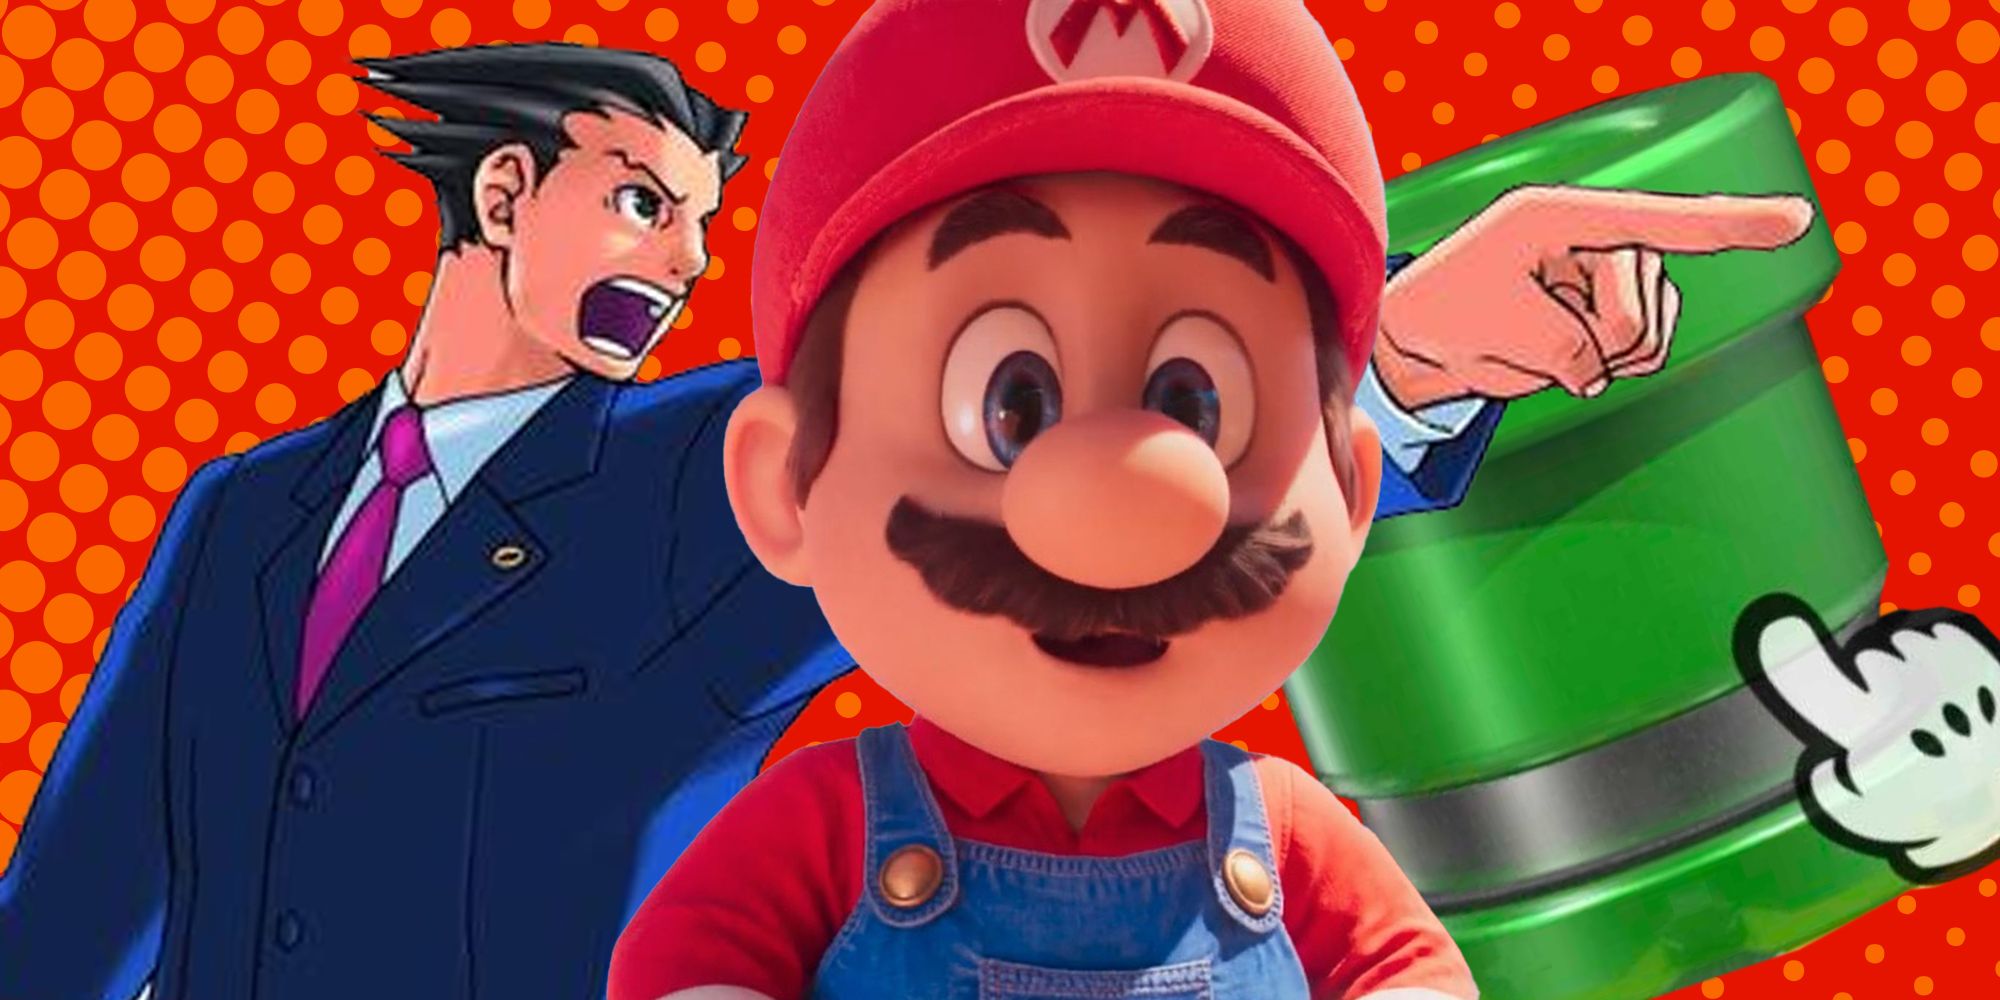 Ace Attorney pointing at a Mario Kart Tour Warp Pipe behind Mario from the Illumination movie who looks shocked